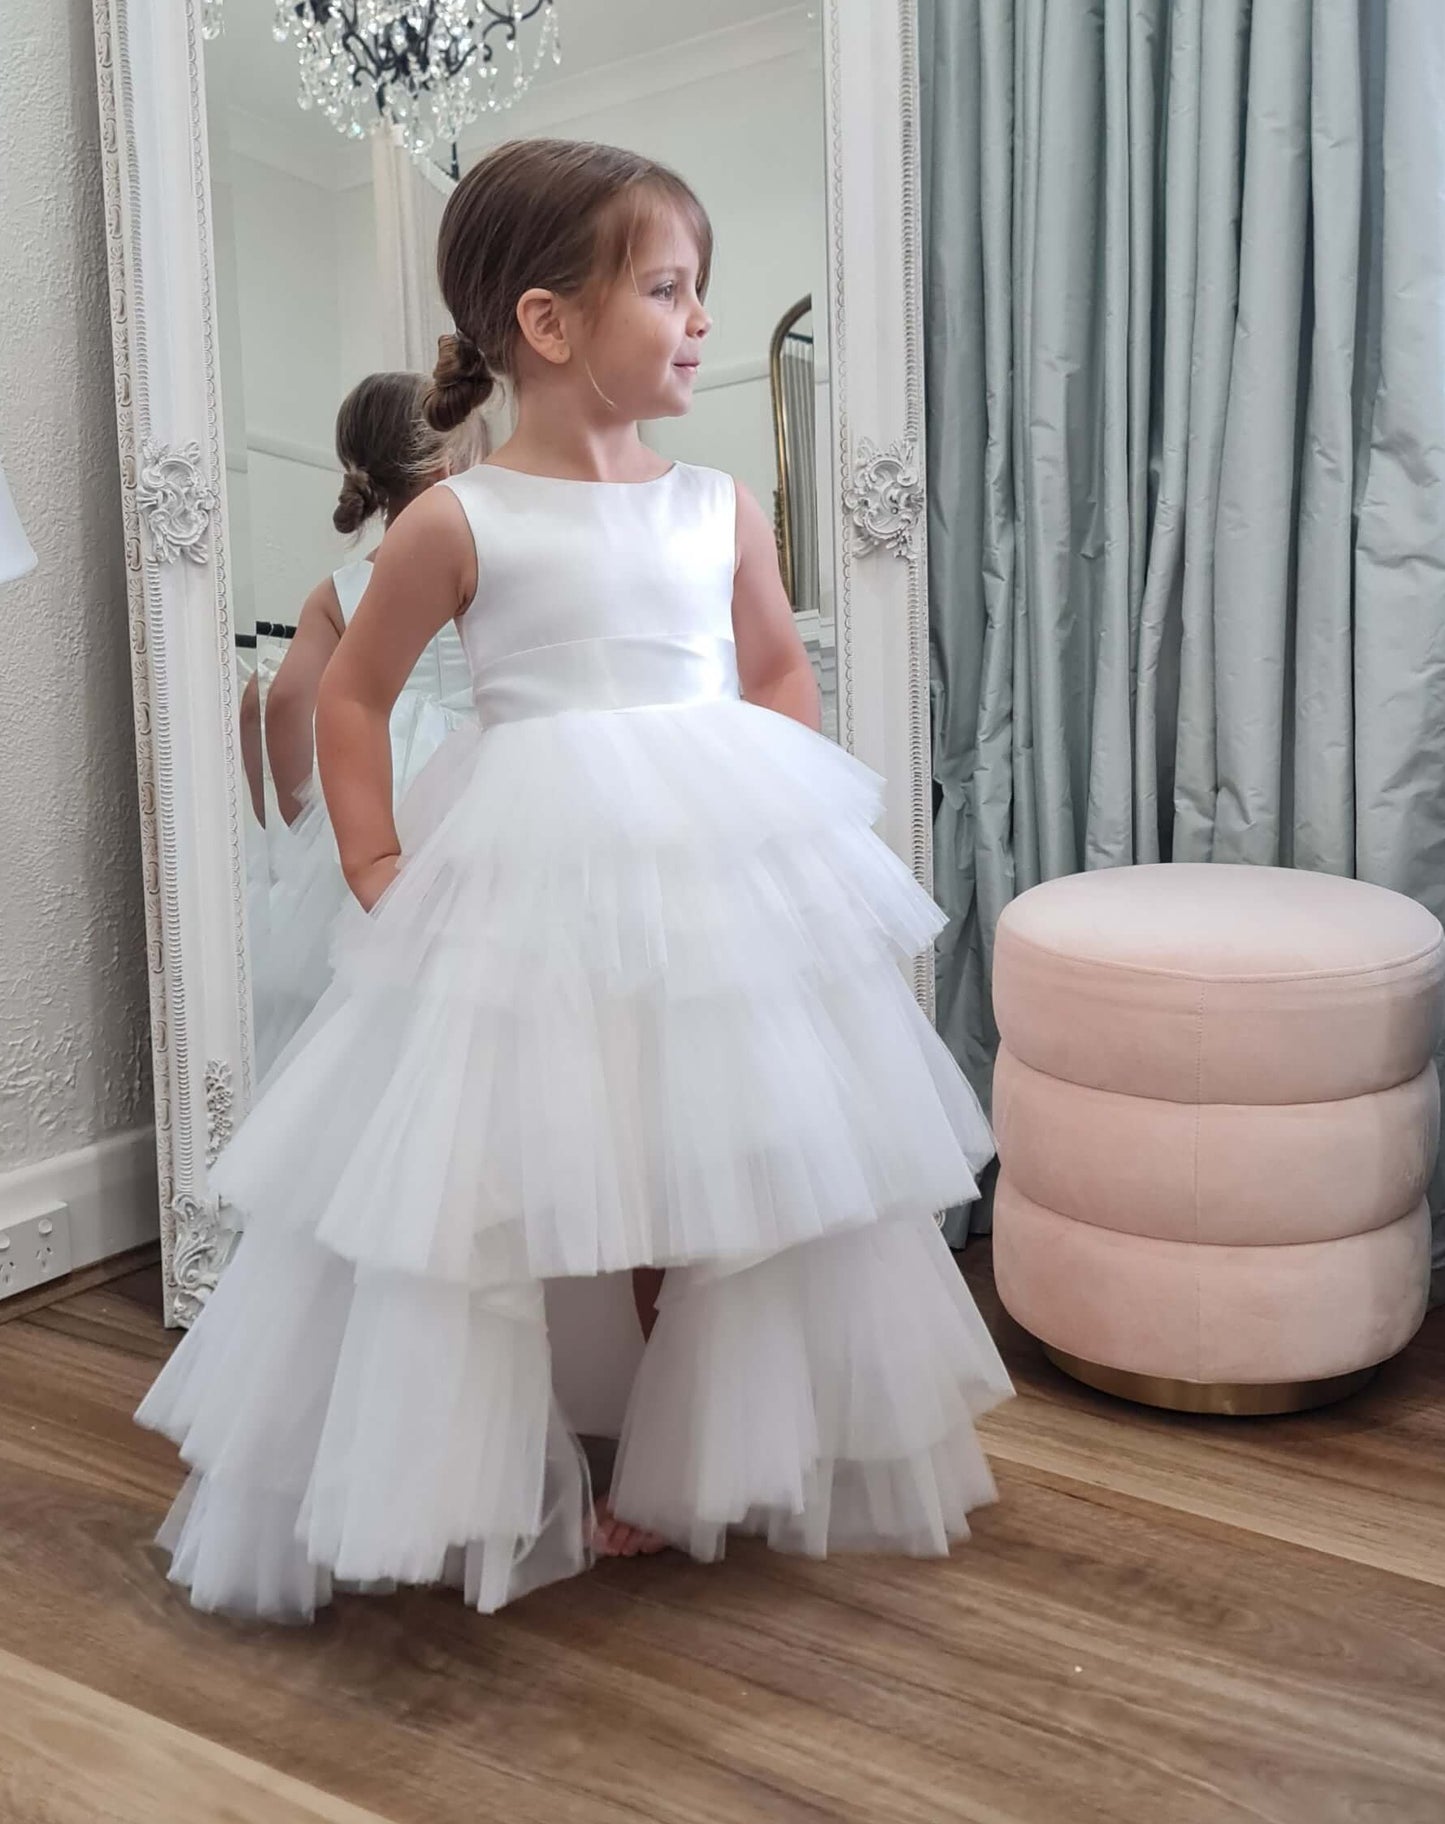 Flower girl dress 'Ivory' which is often referred to as Silk White/Bridal White